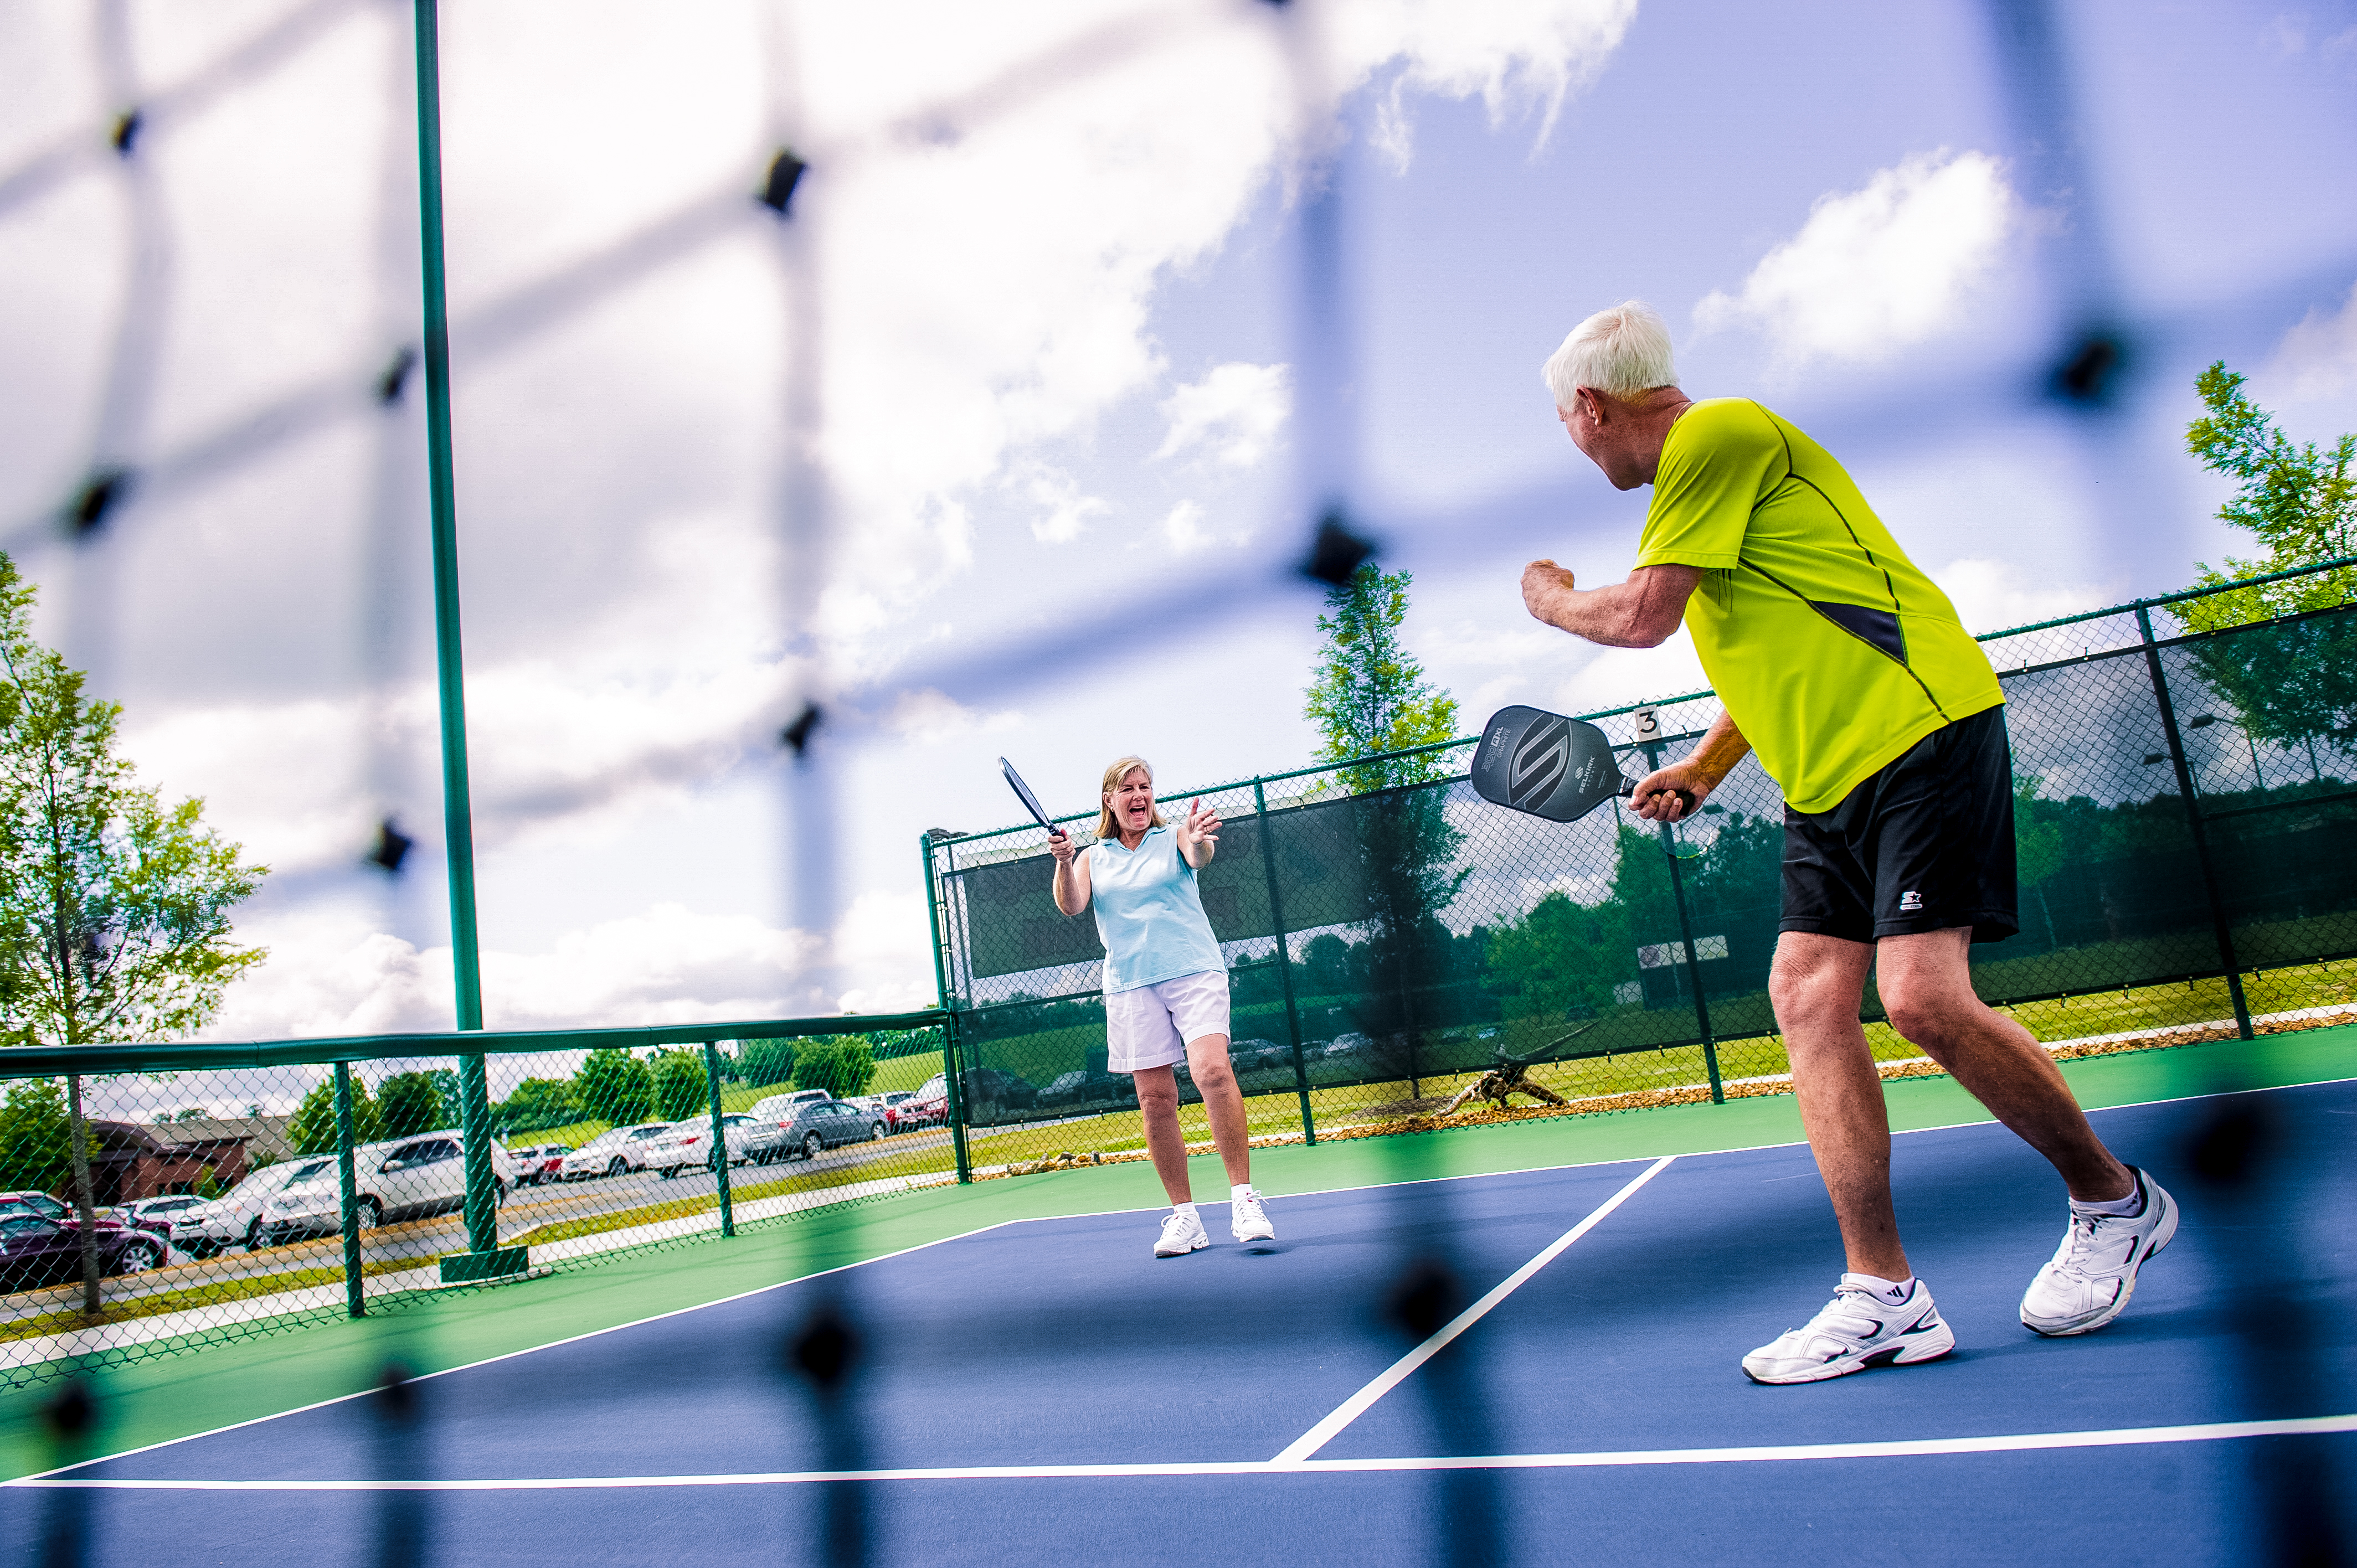 32. Pickleball is your new favorite sport